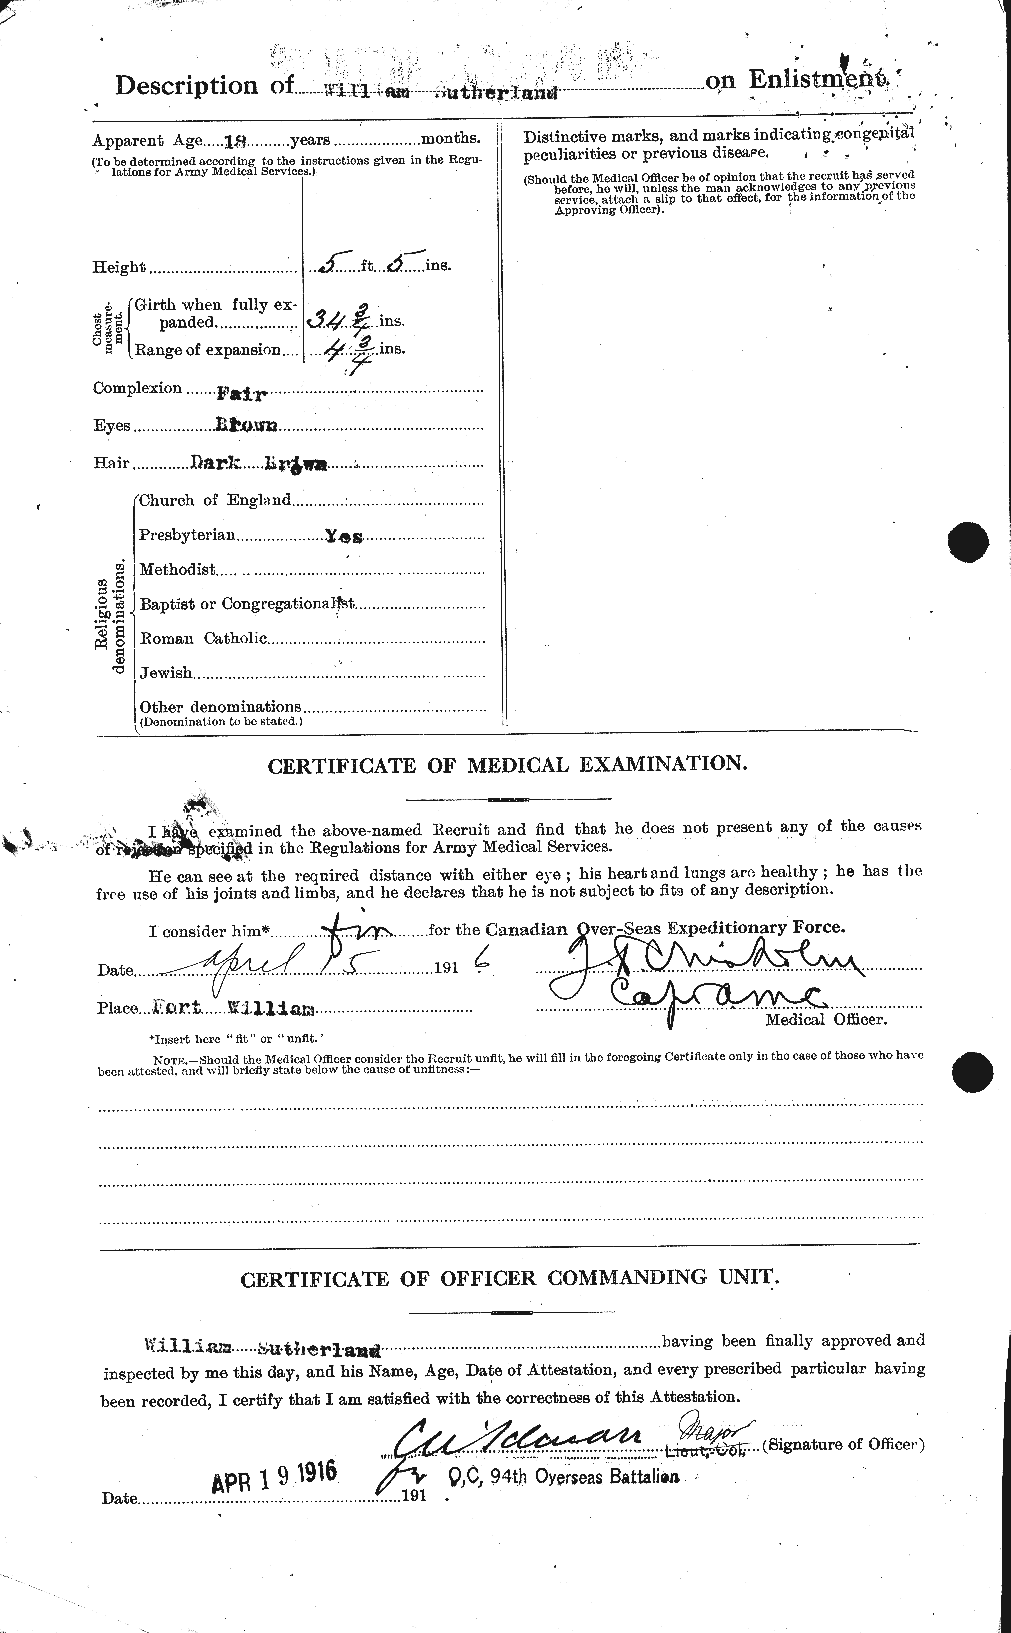 Personnel Records of the First World War - CEF 126518b